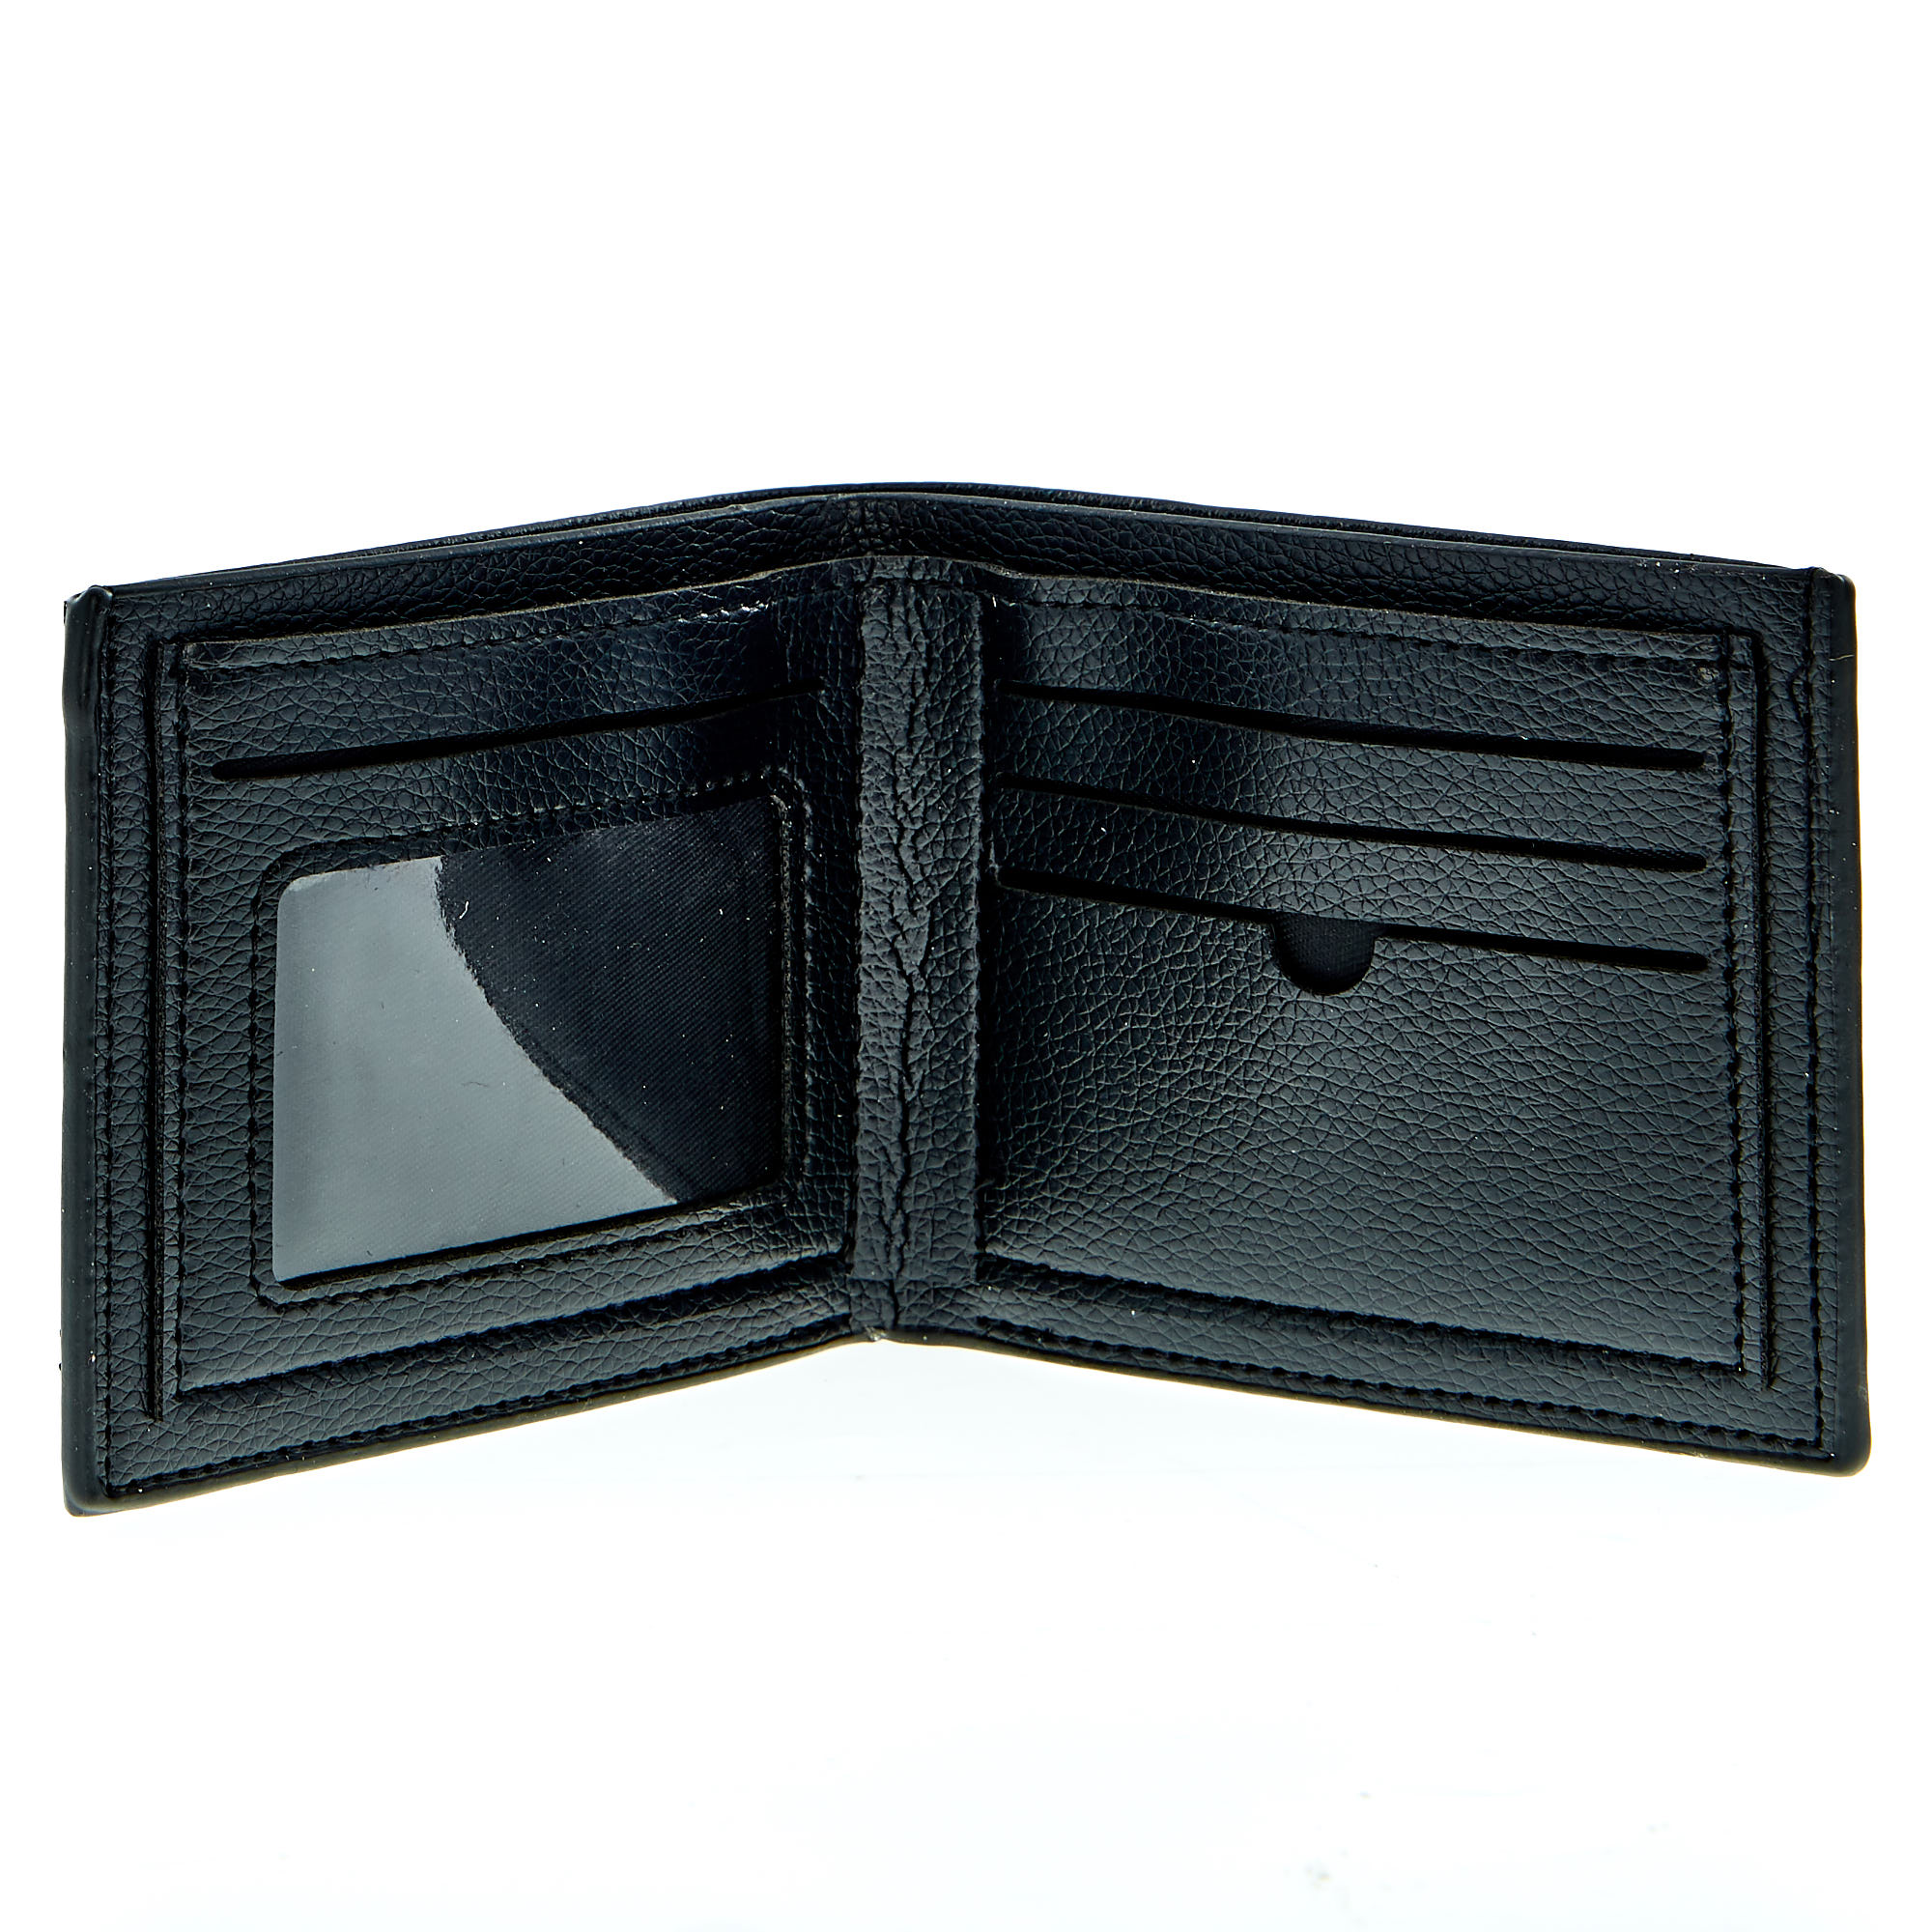 Buy Dad Black Faux Leather Wallet for GBP 2.00 | Card Factory UK